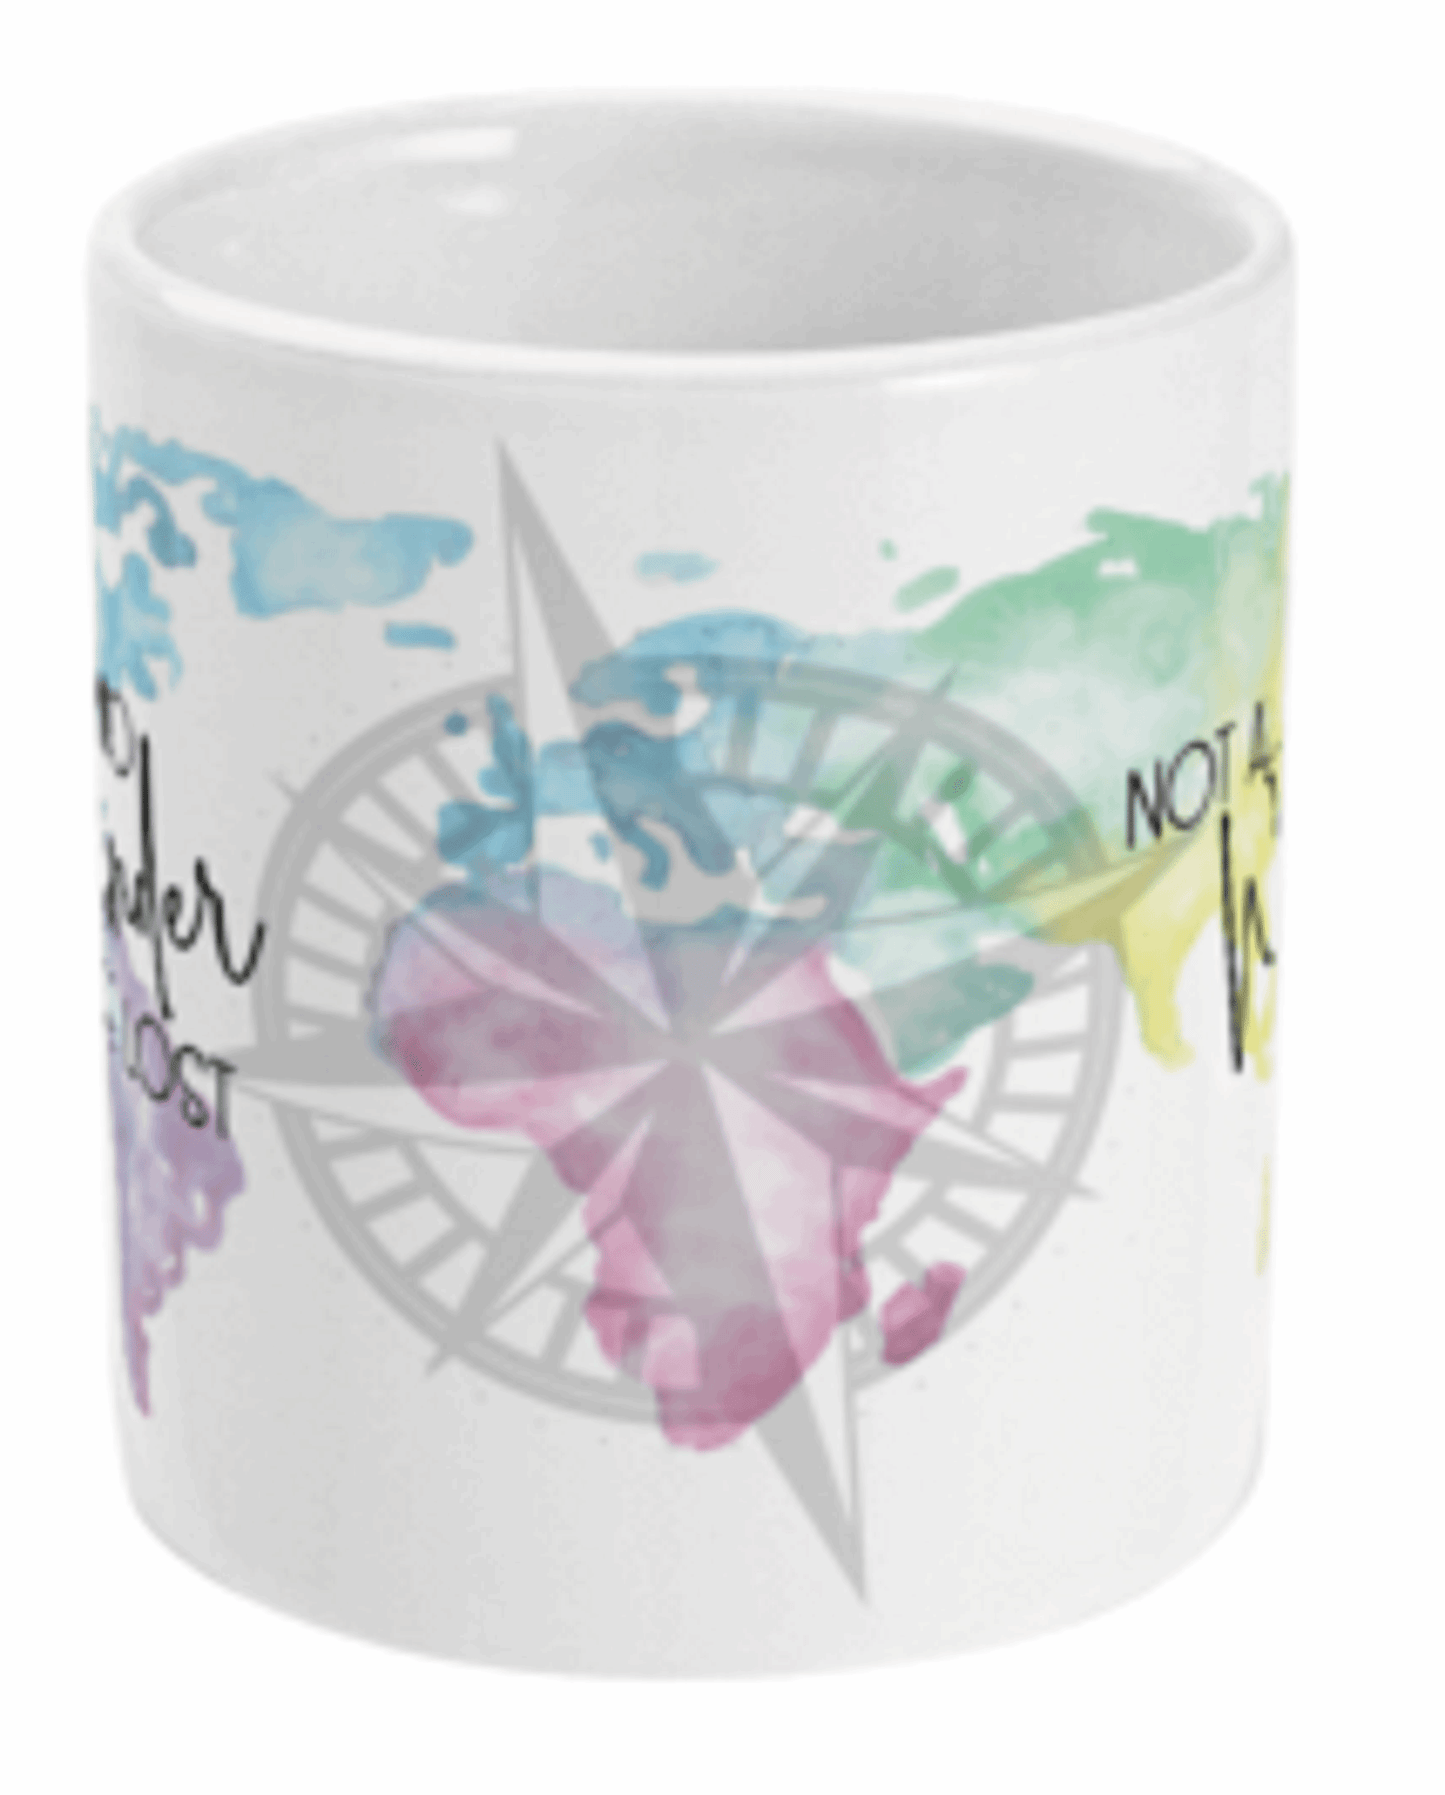  Not All Who Wander Are Lost Mug by Free Spirit Accessories sold by Free Spirit Accessories